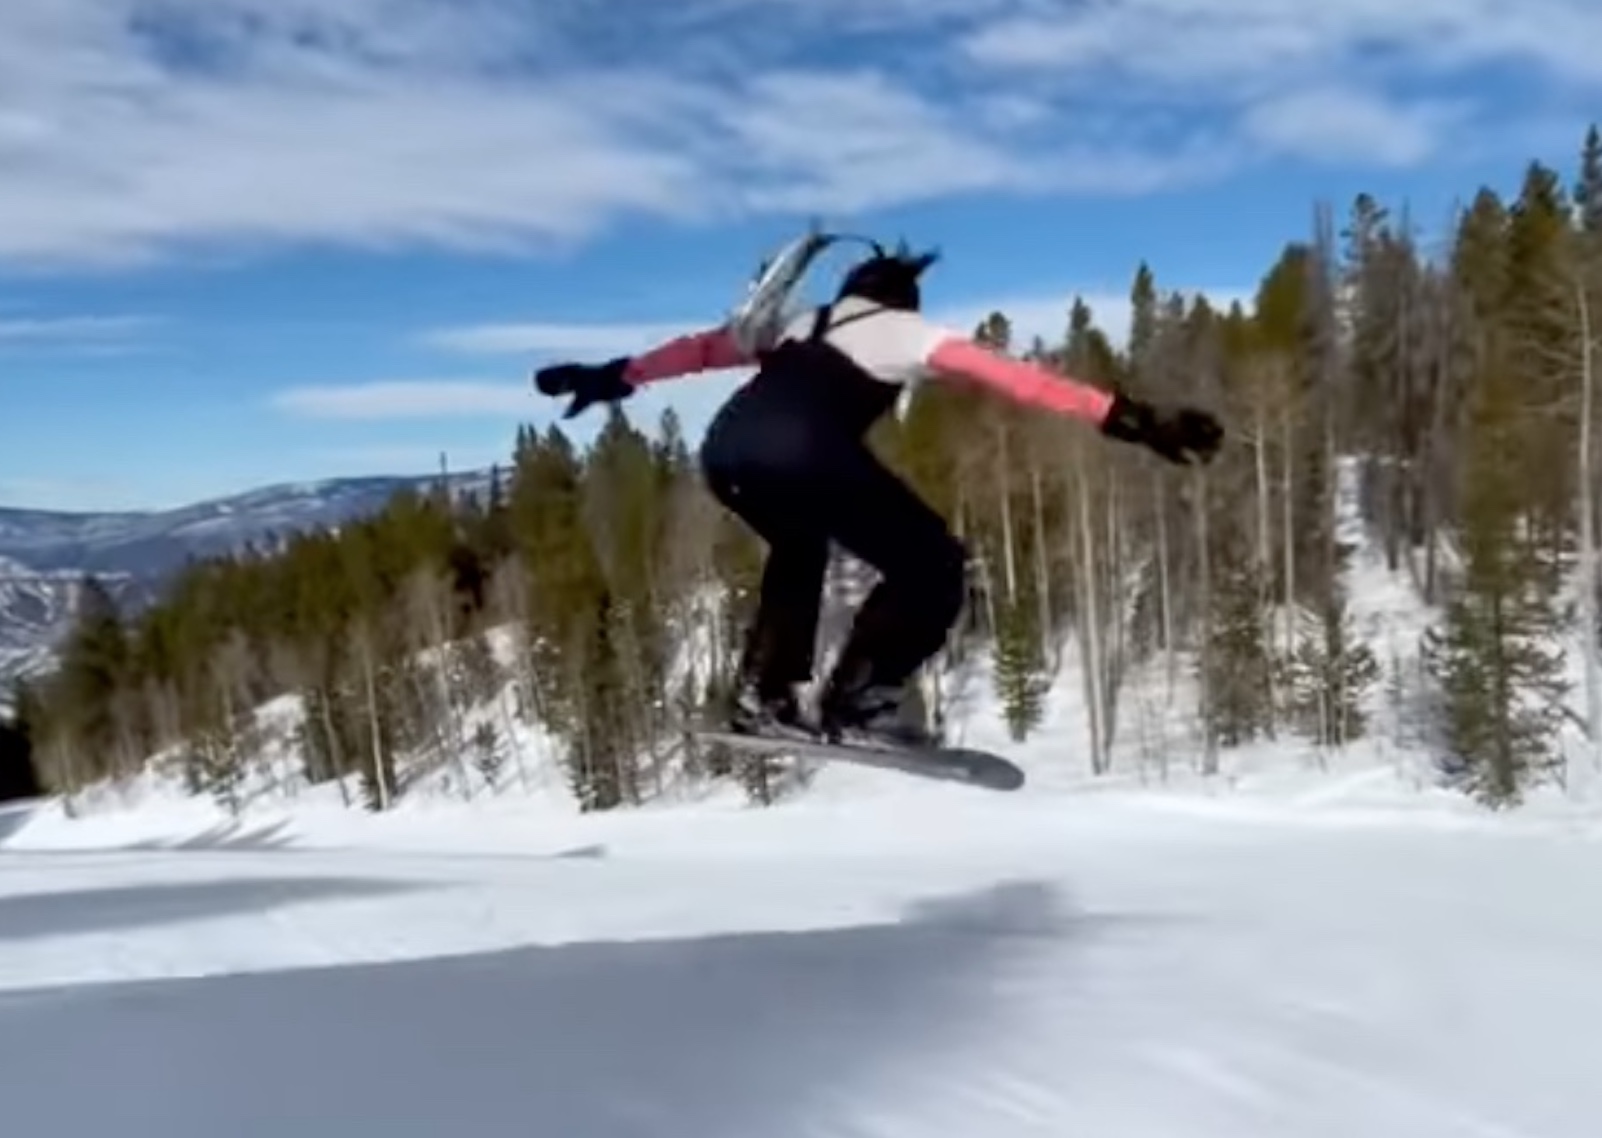 VIDEO: Kendall Jenner Gets Airtime in Aspen